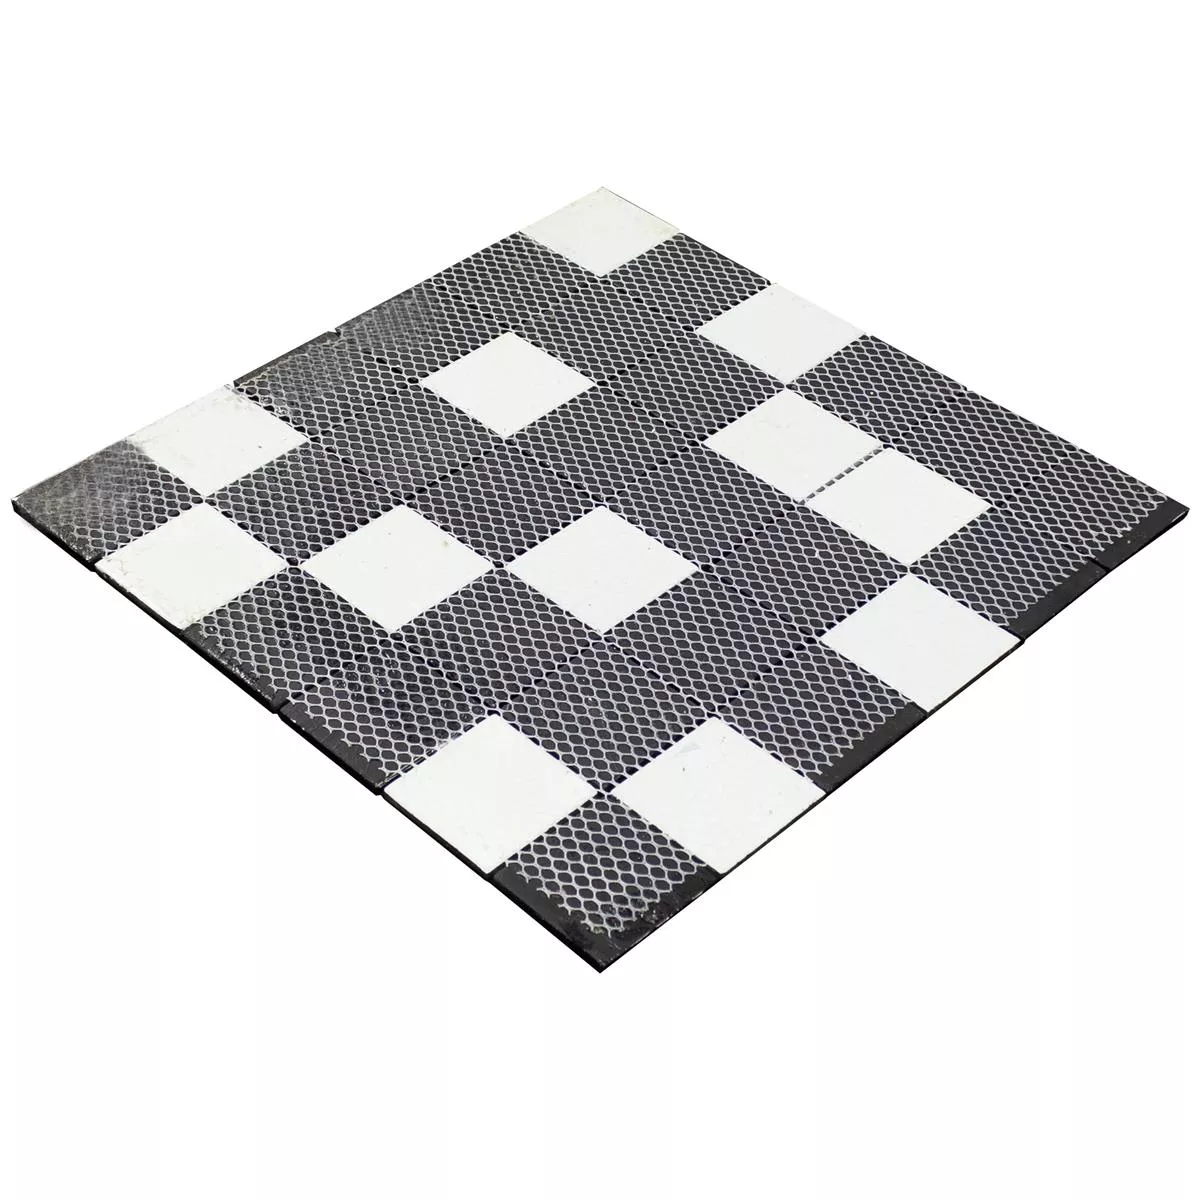 Glass Mosaic Tiles Curlew Black Silver Q48 4mm